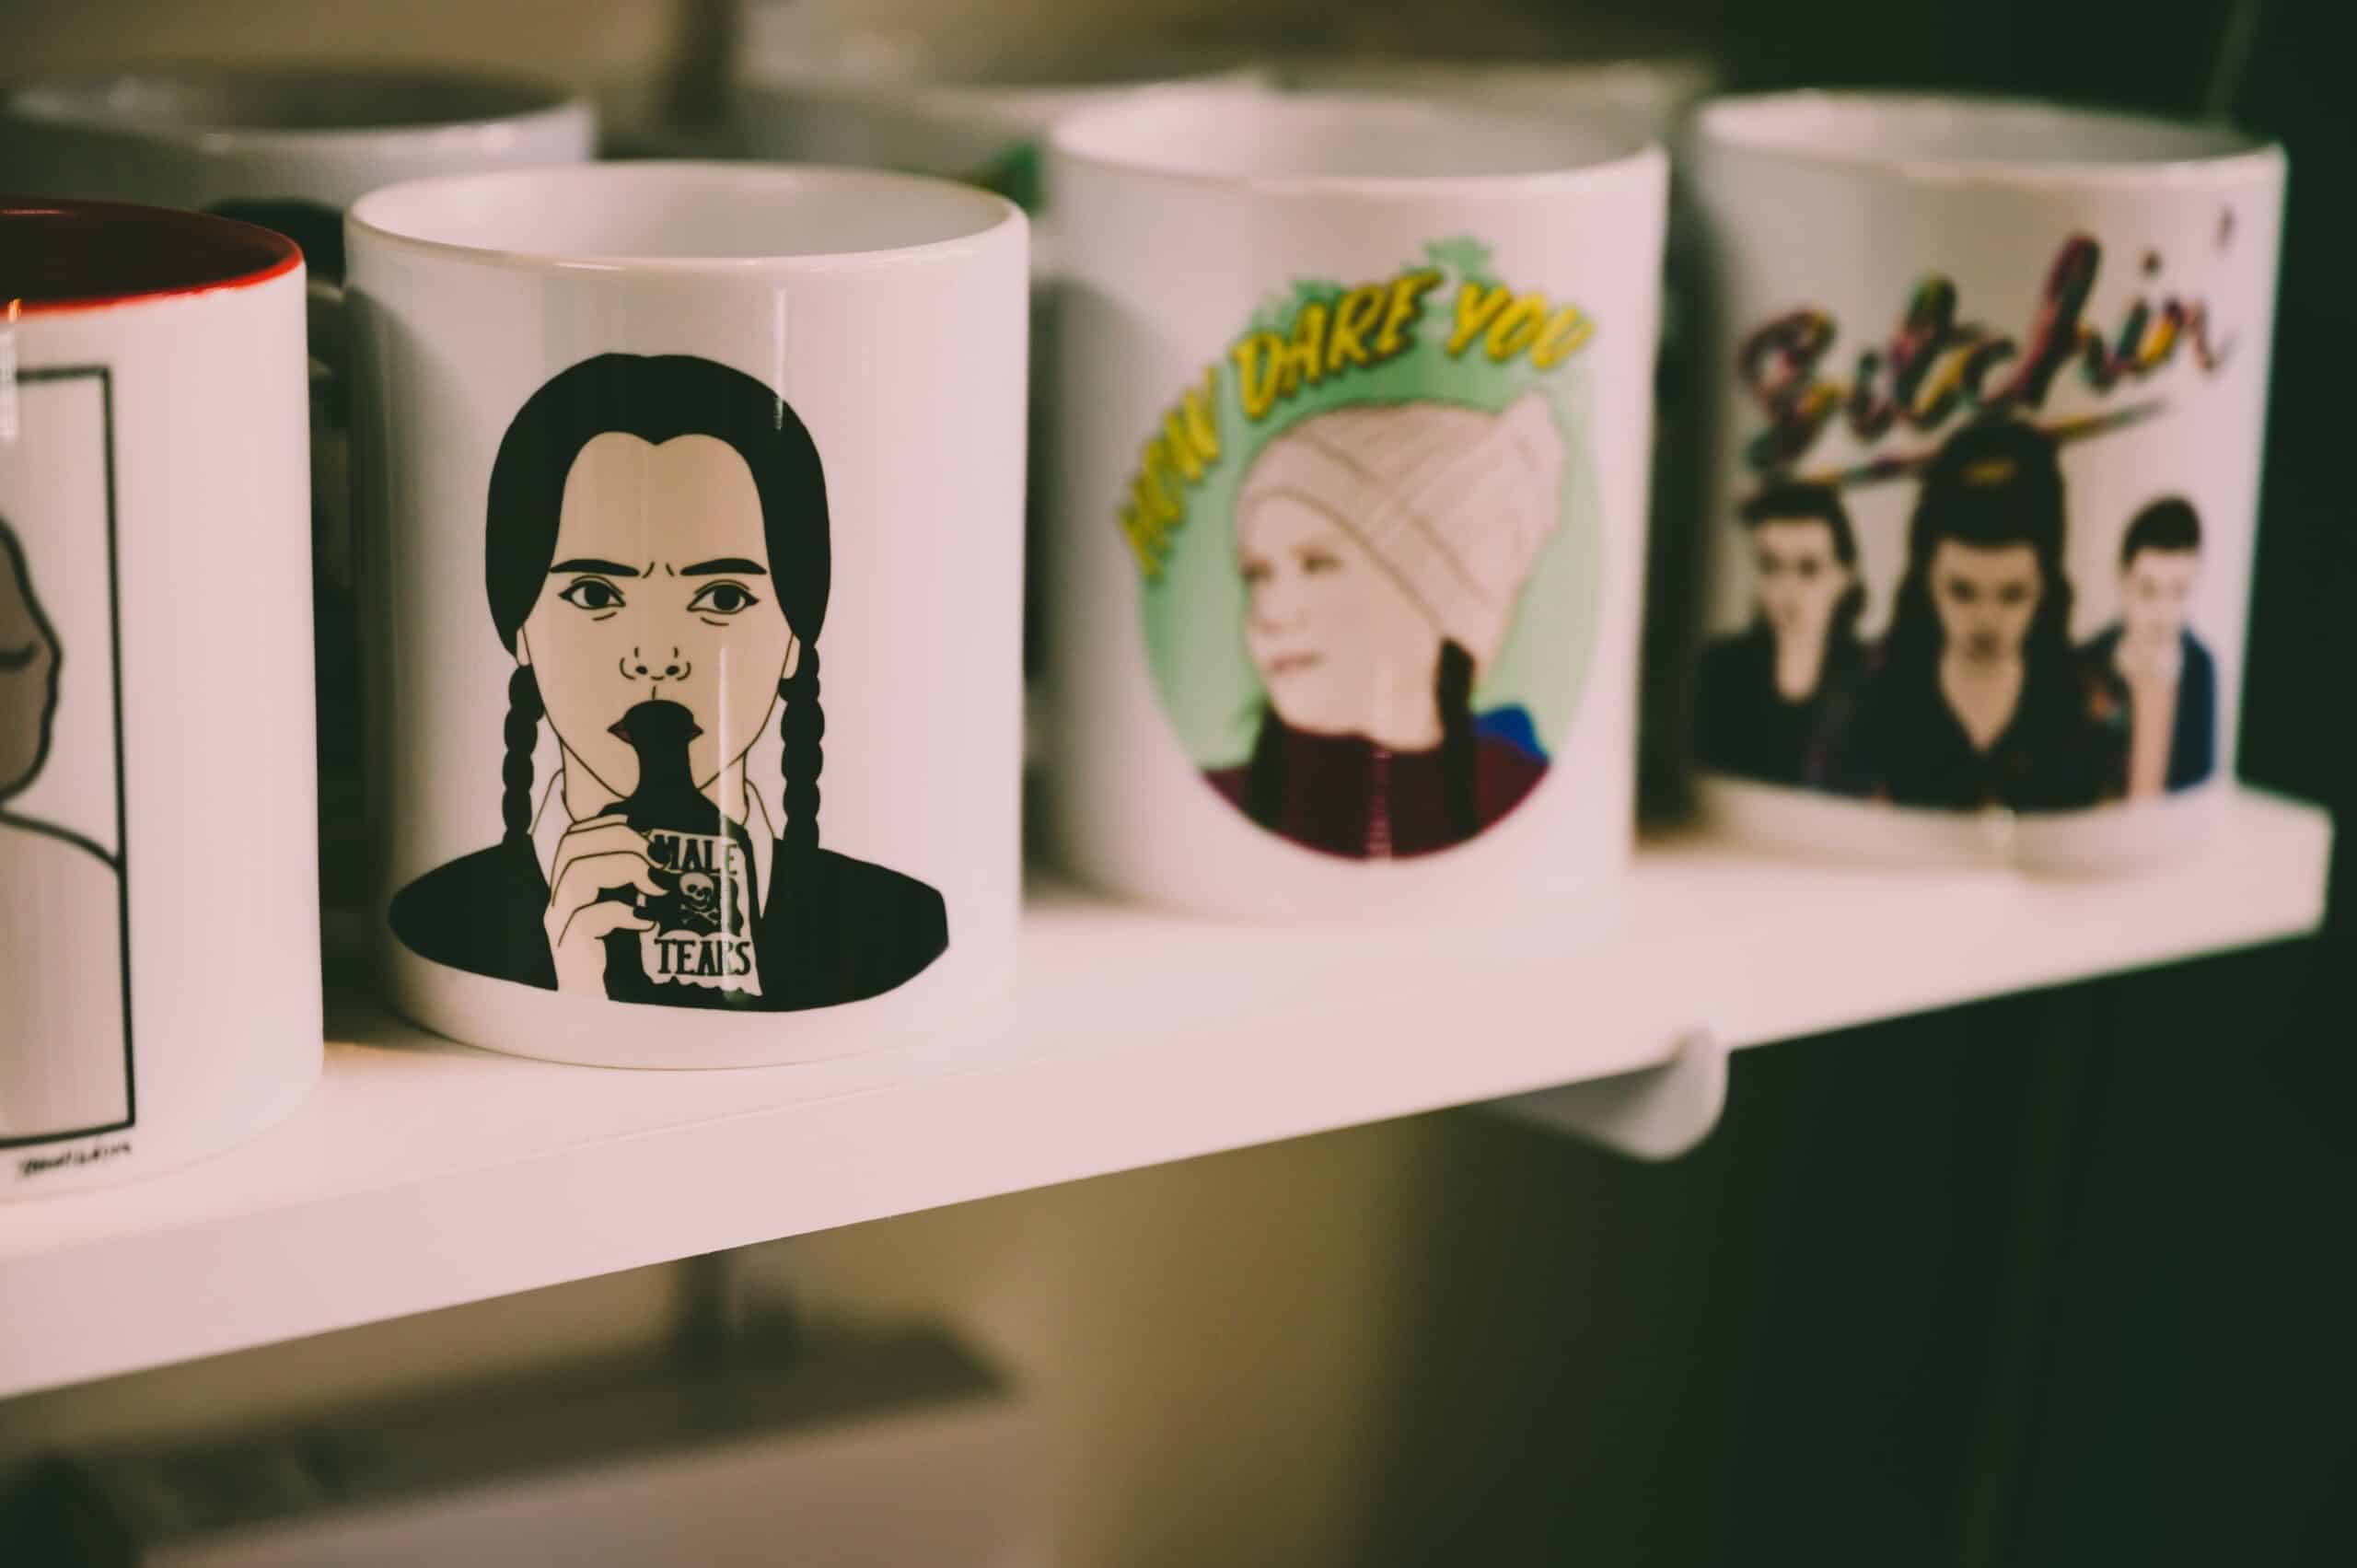 Dye sublimation ceramic mugs from Prince William Pottery